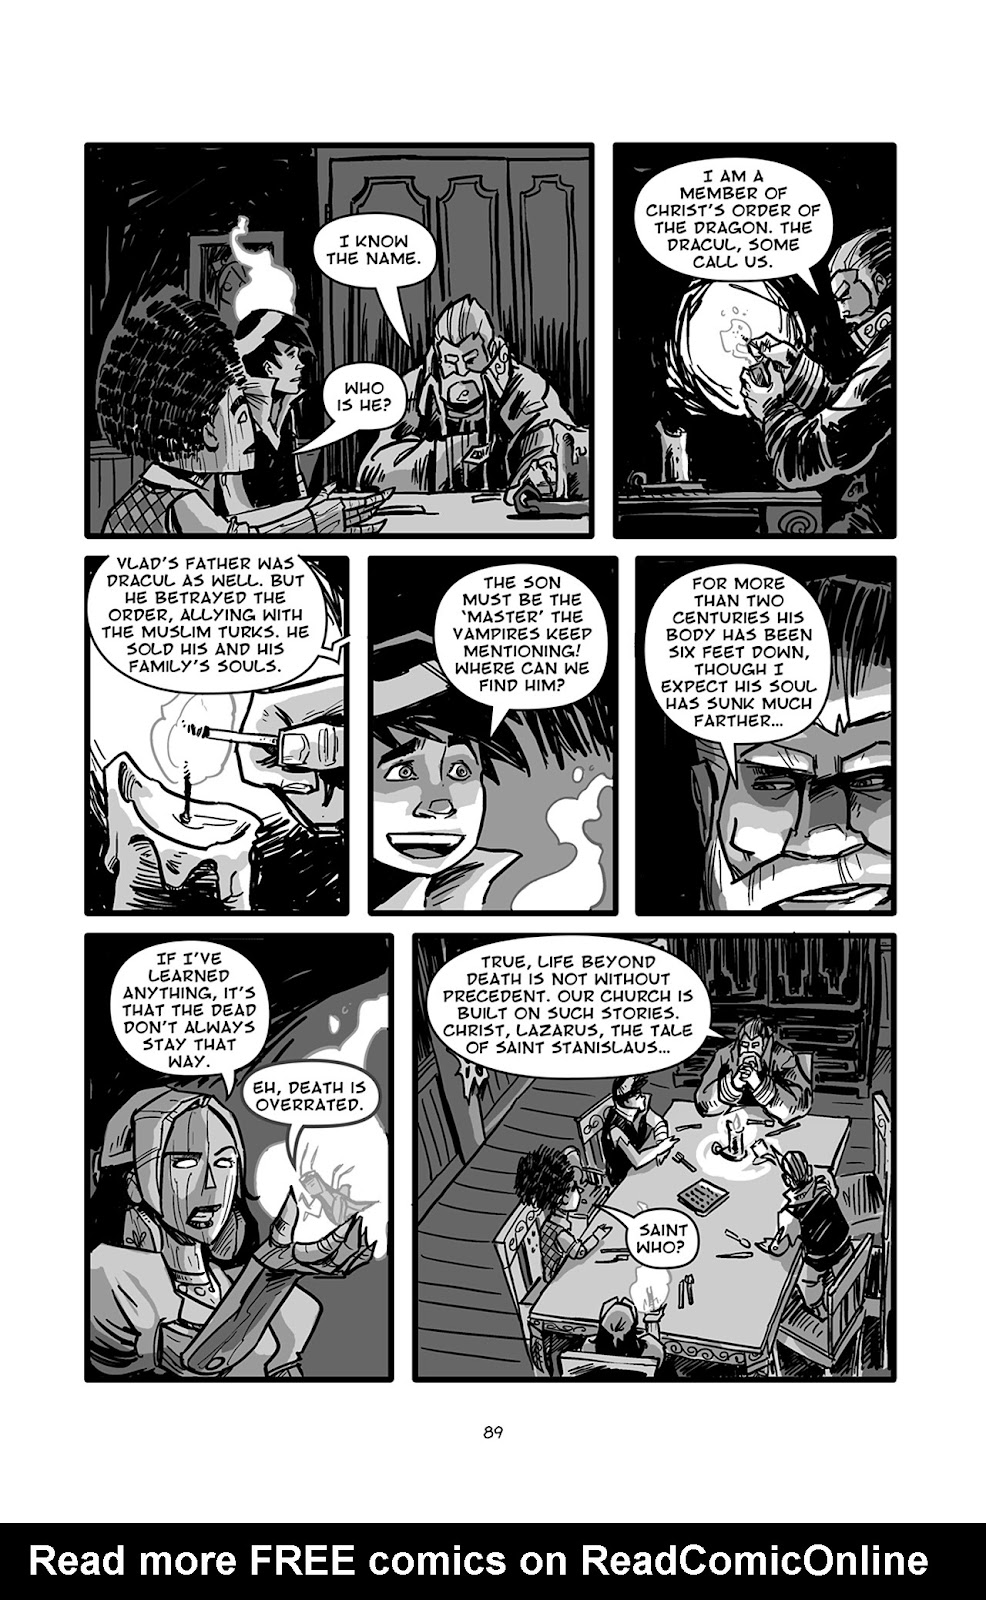 Pinocchio: Vampire Slayer - Of Wood and Blood issue 4 - Page 16